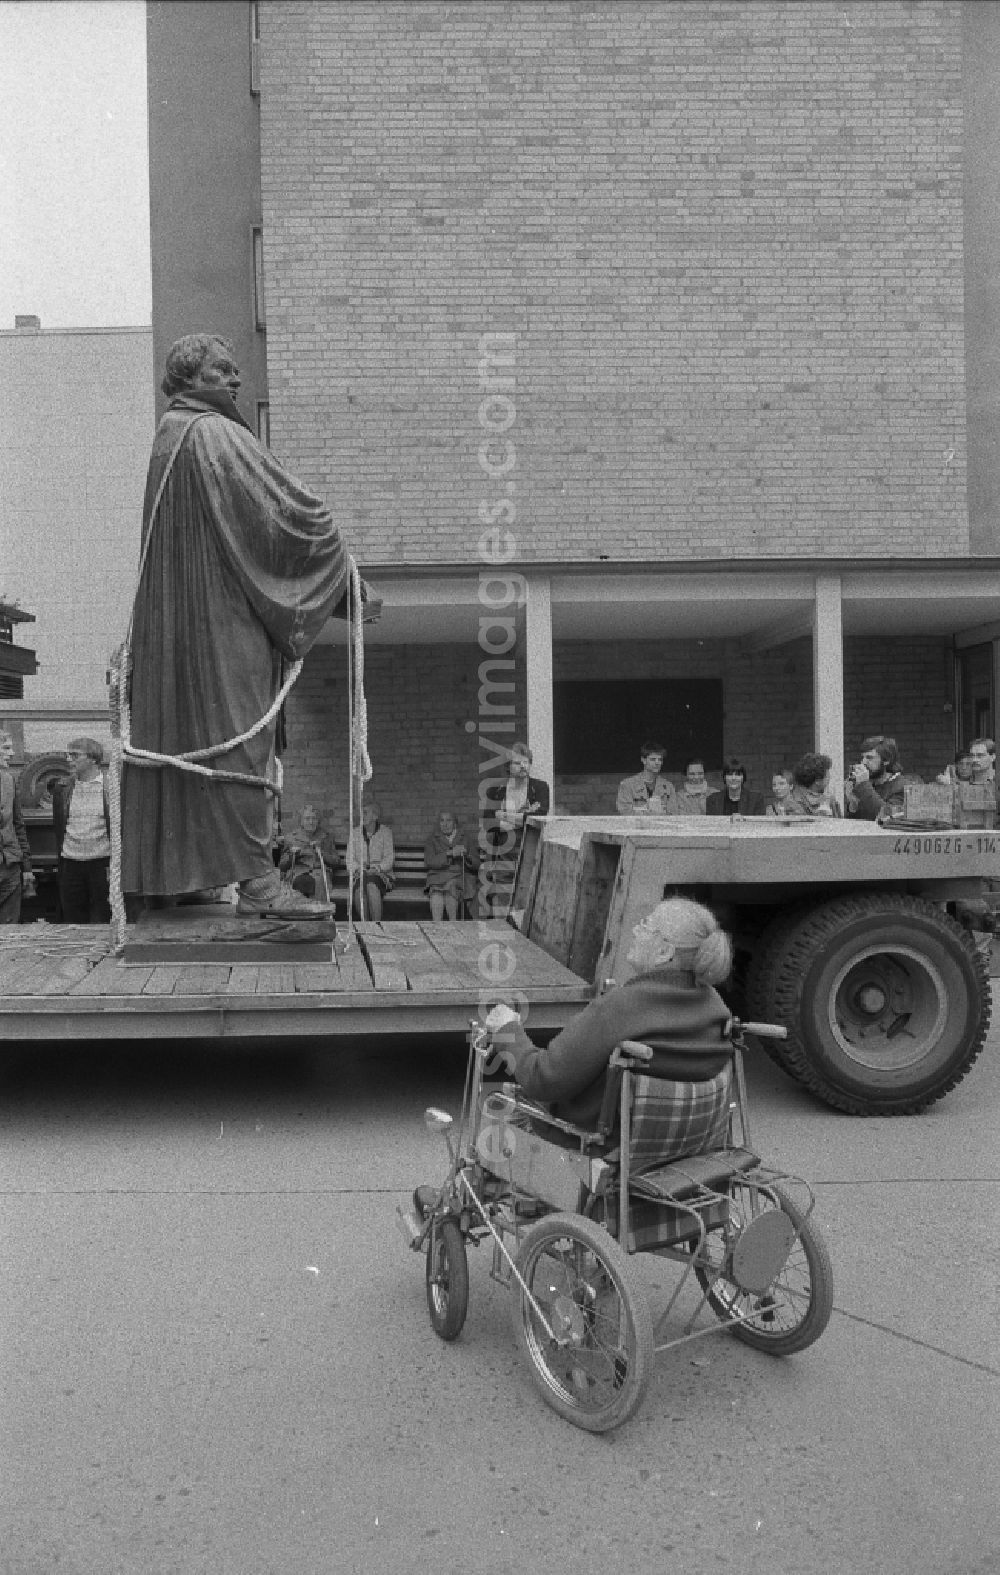 GDR picture archive: Berlin - Sculpture of the Martin Luther Monument during the re-erection on Karl-Liebknecht-Strasse in the Mitte district of East Berlin in the area of the former GDR, German Democratic Republic